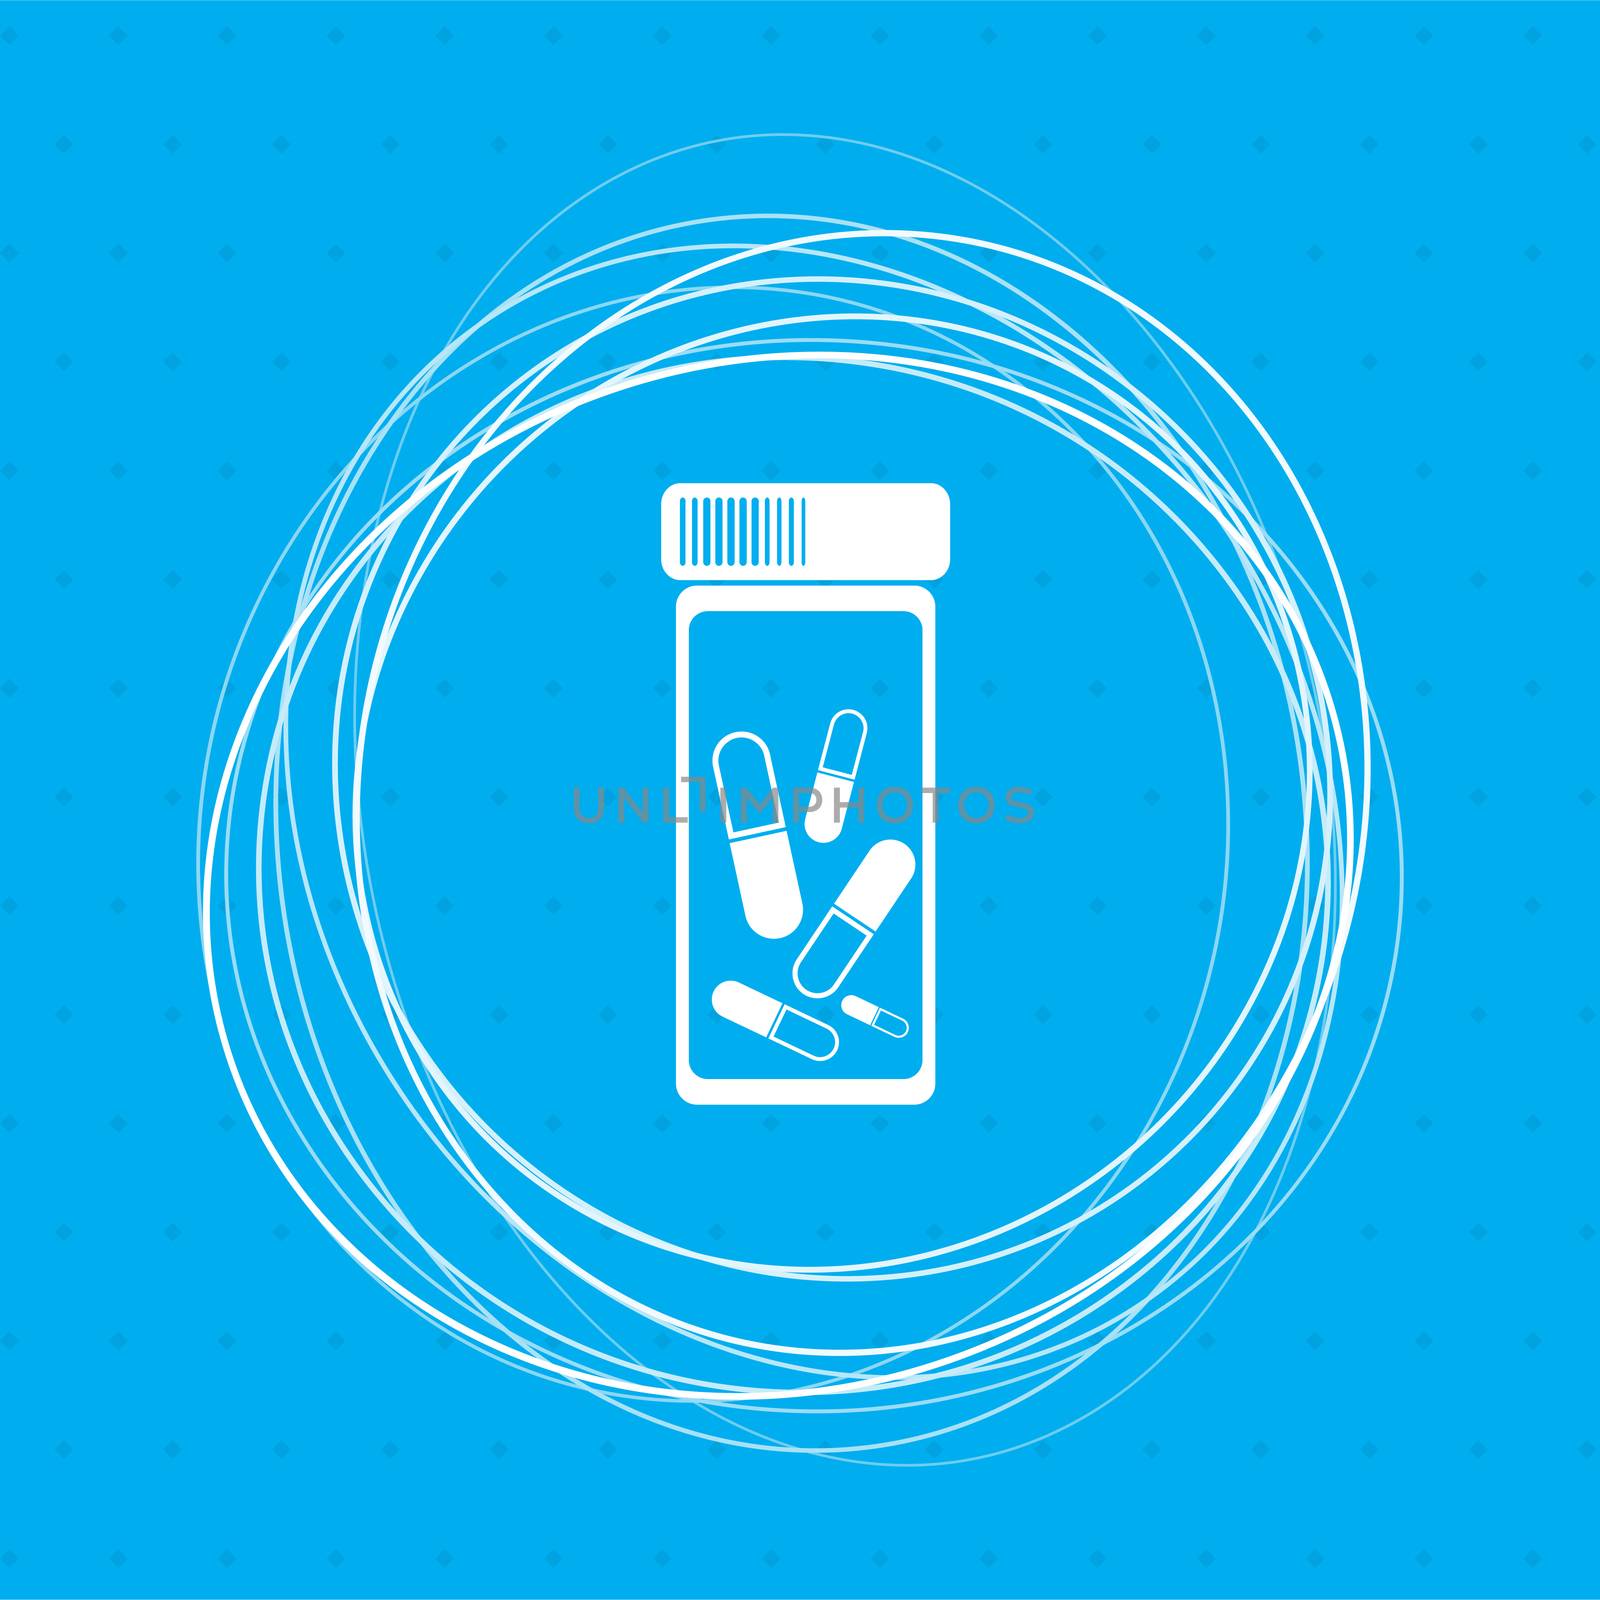 Pills, medication icon on a blue background with abstract circles around and place for your text. illustration